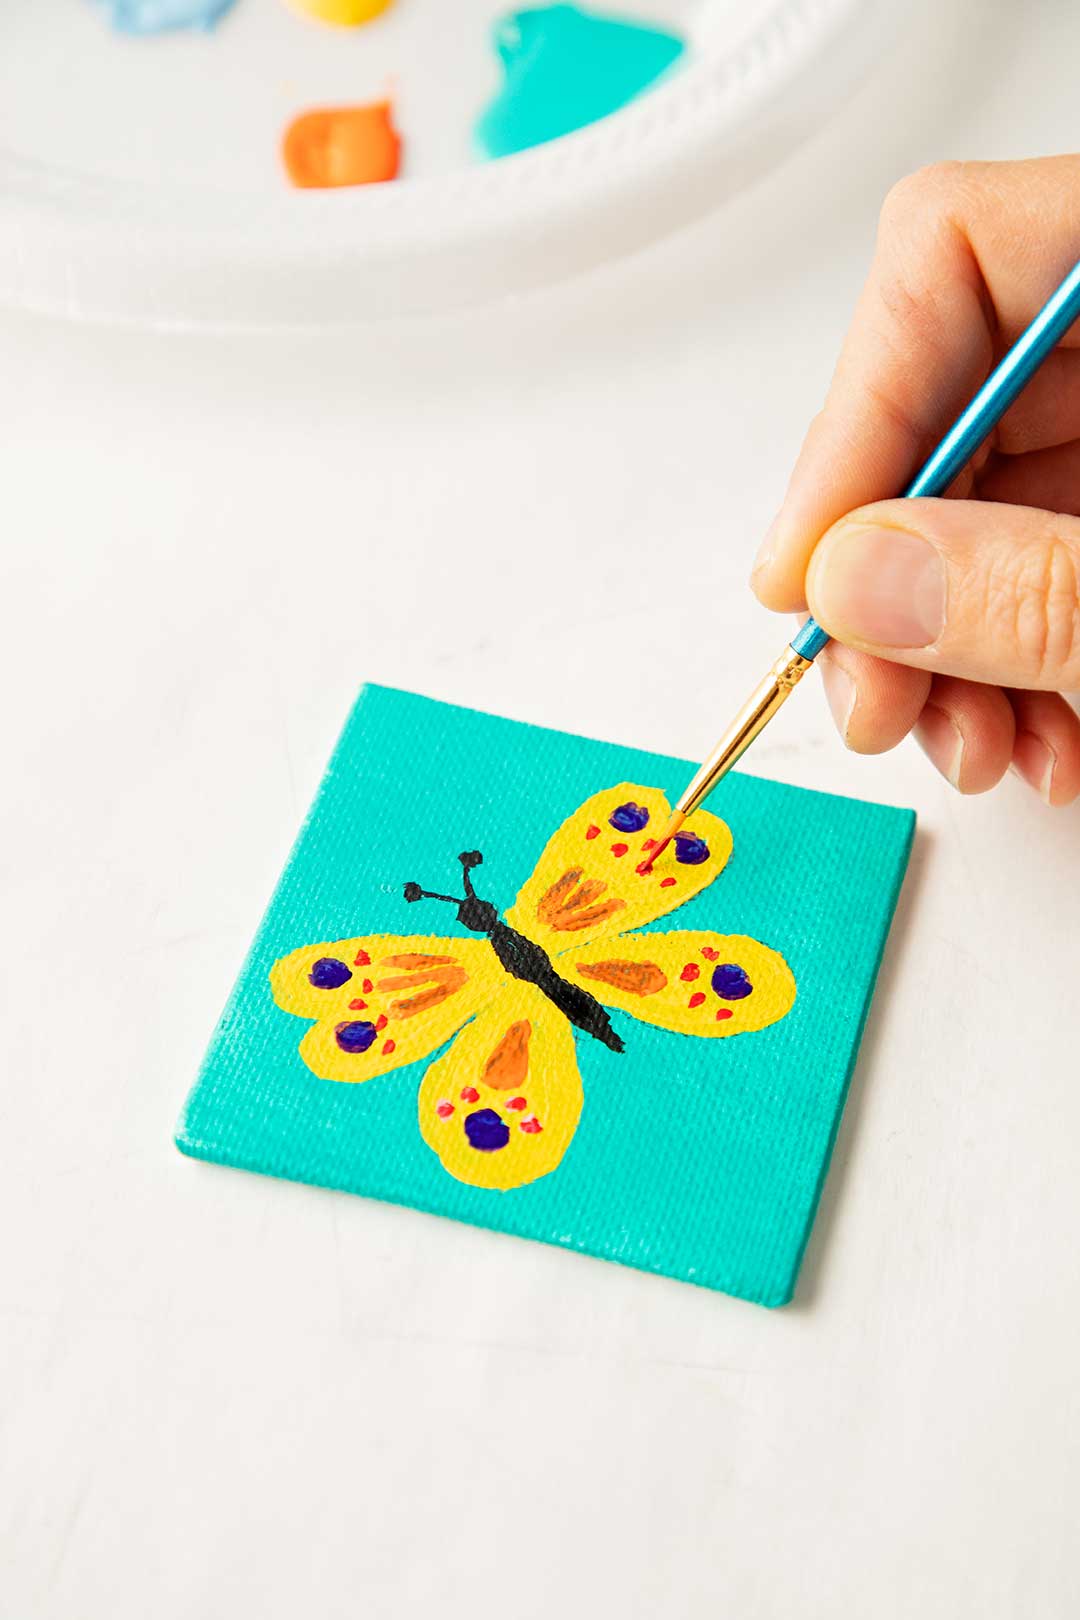 Hand painting final touches on yellow butterfly against a teal background painted on a mini canvas.